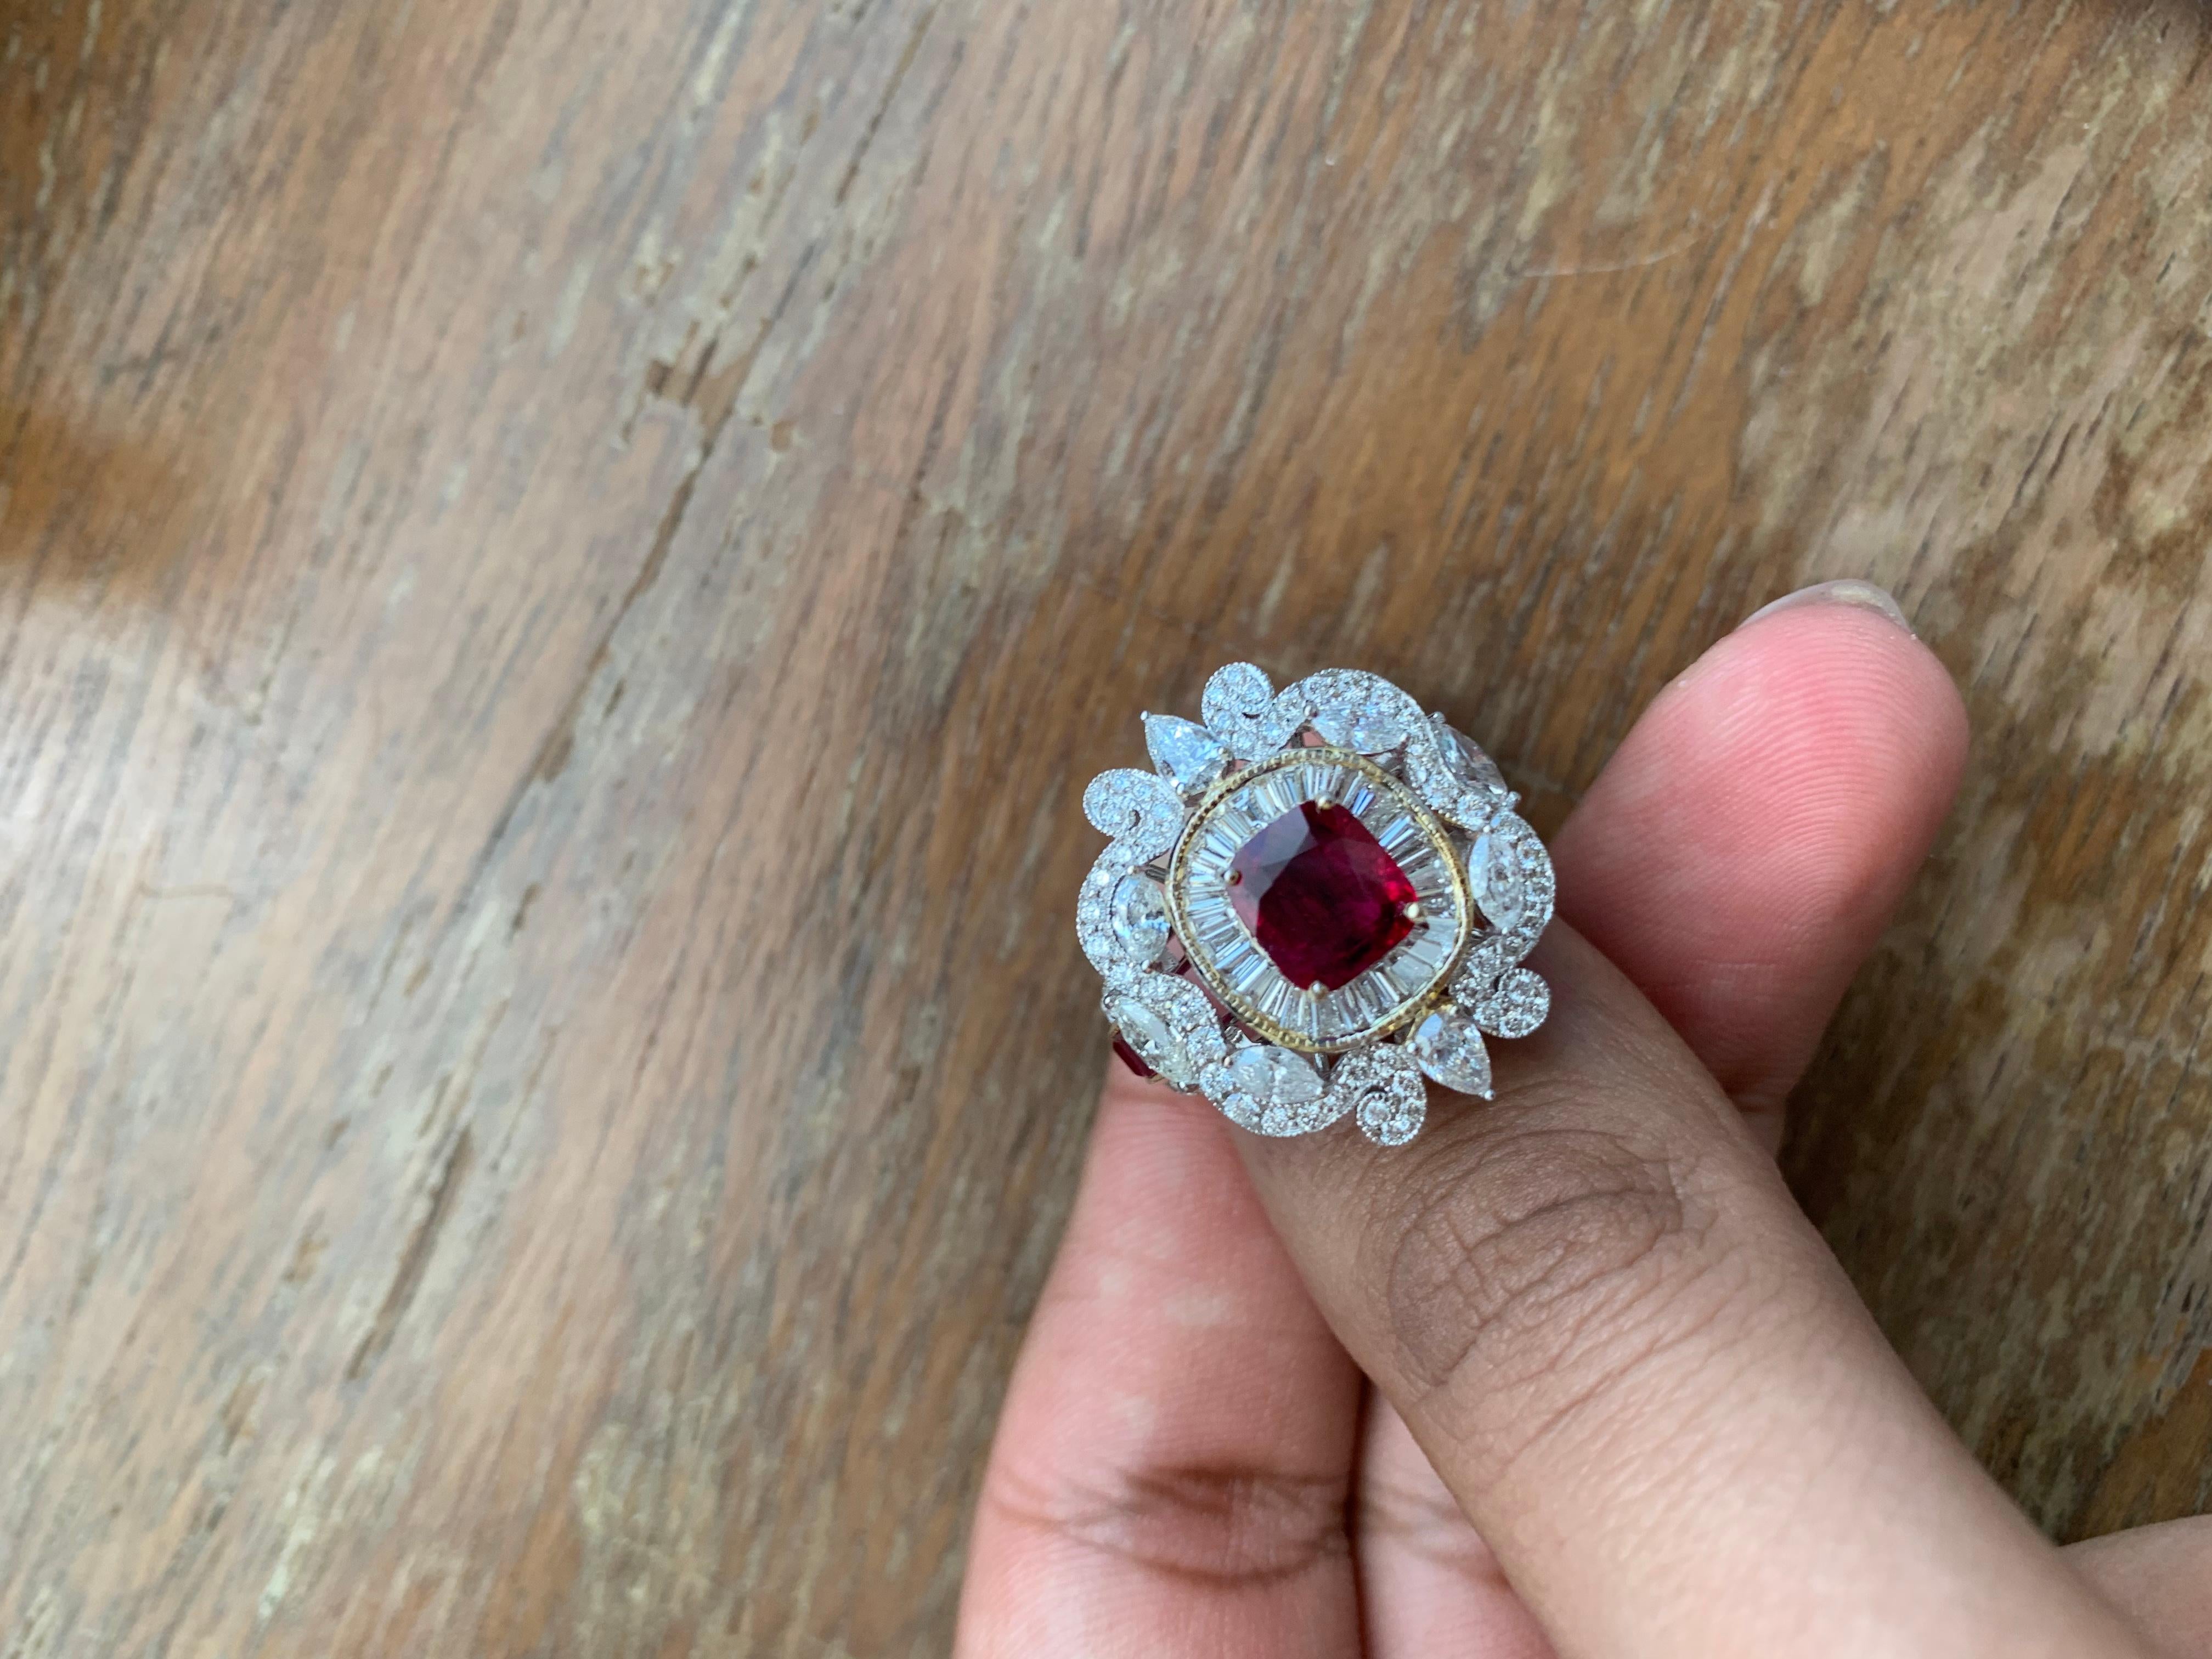 A brand new handcrafted ruby ring by Rewa Jewels. The ring's center stone is 1.83 carat Burmese ruby certified by Gem Research Swisslab (GRS) as natural, unheated, 'Pigeon blood' with the certificate number: 2022-060412. The centre ruby has been set